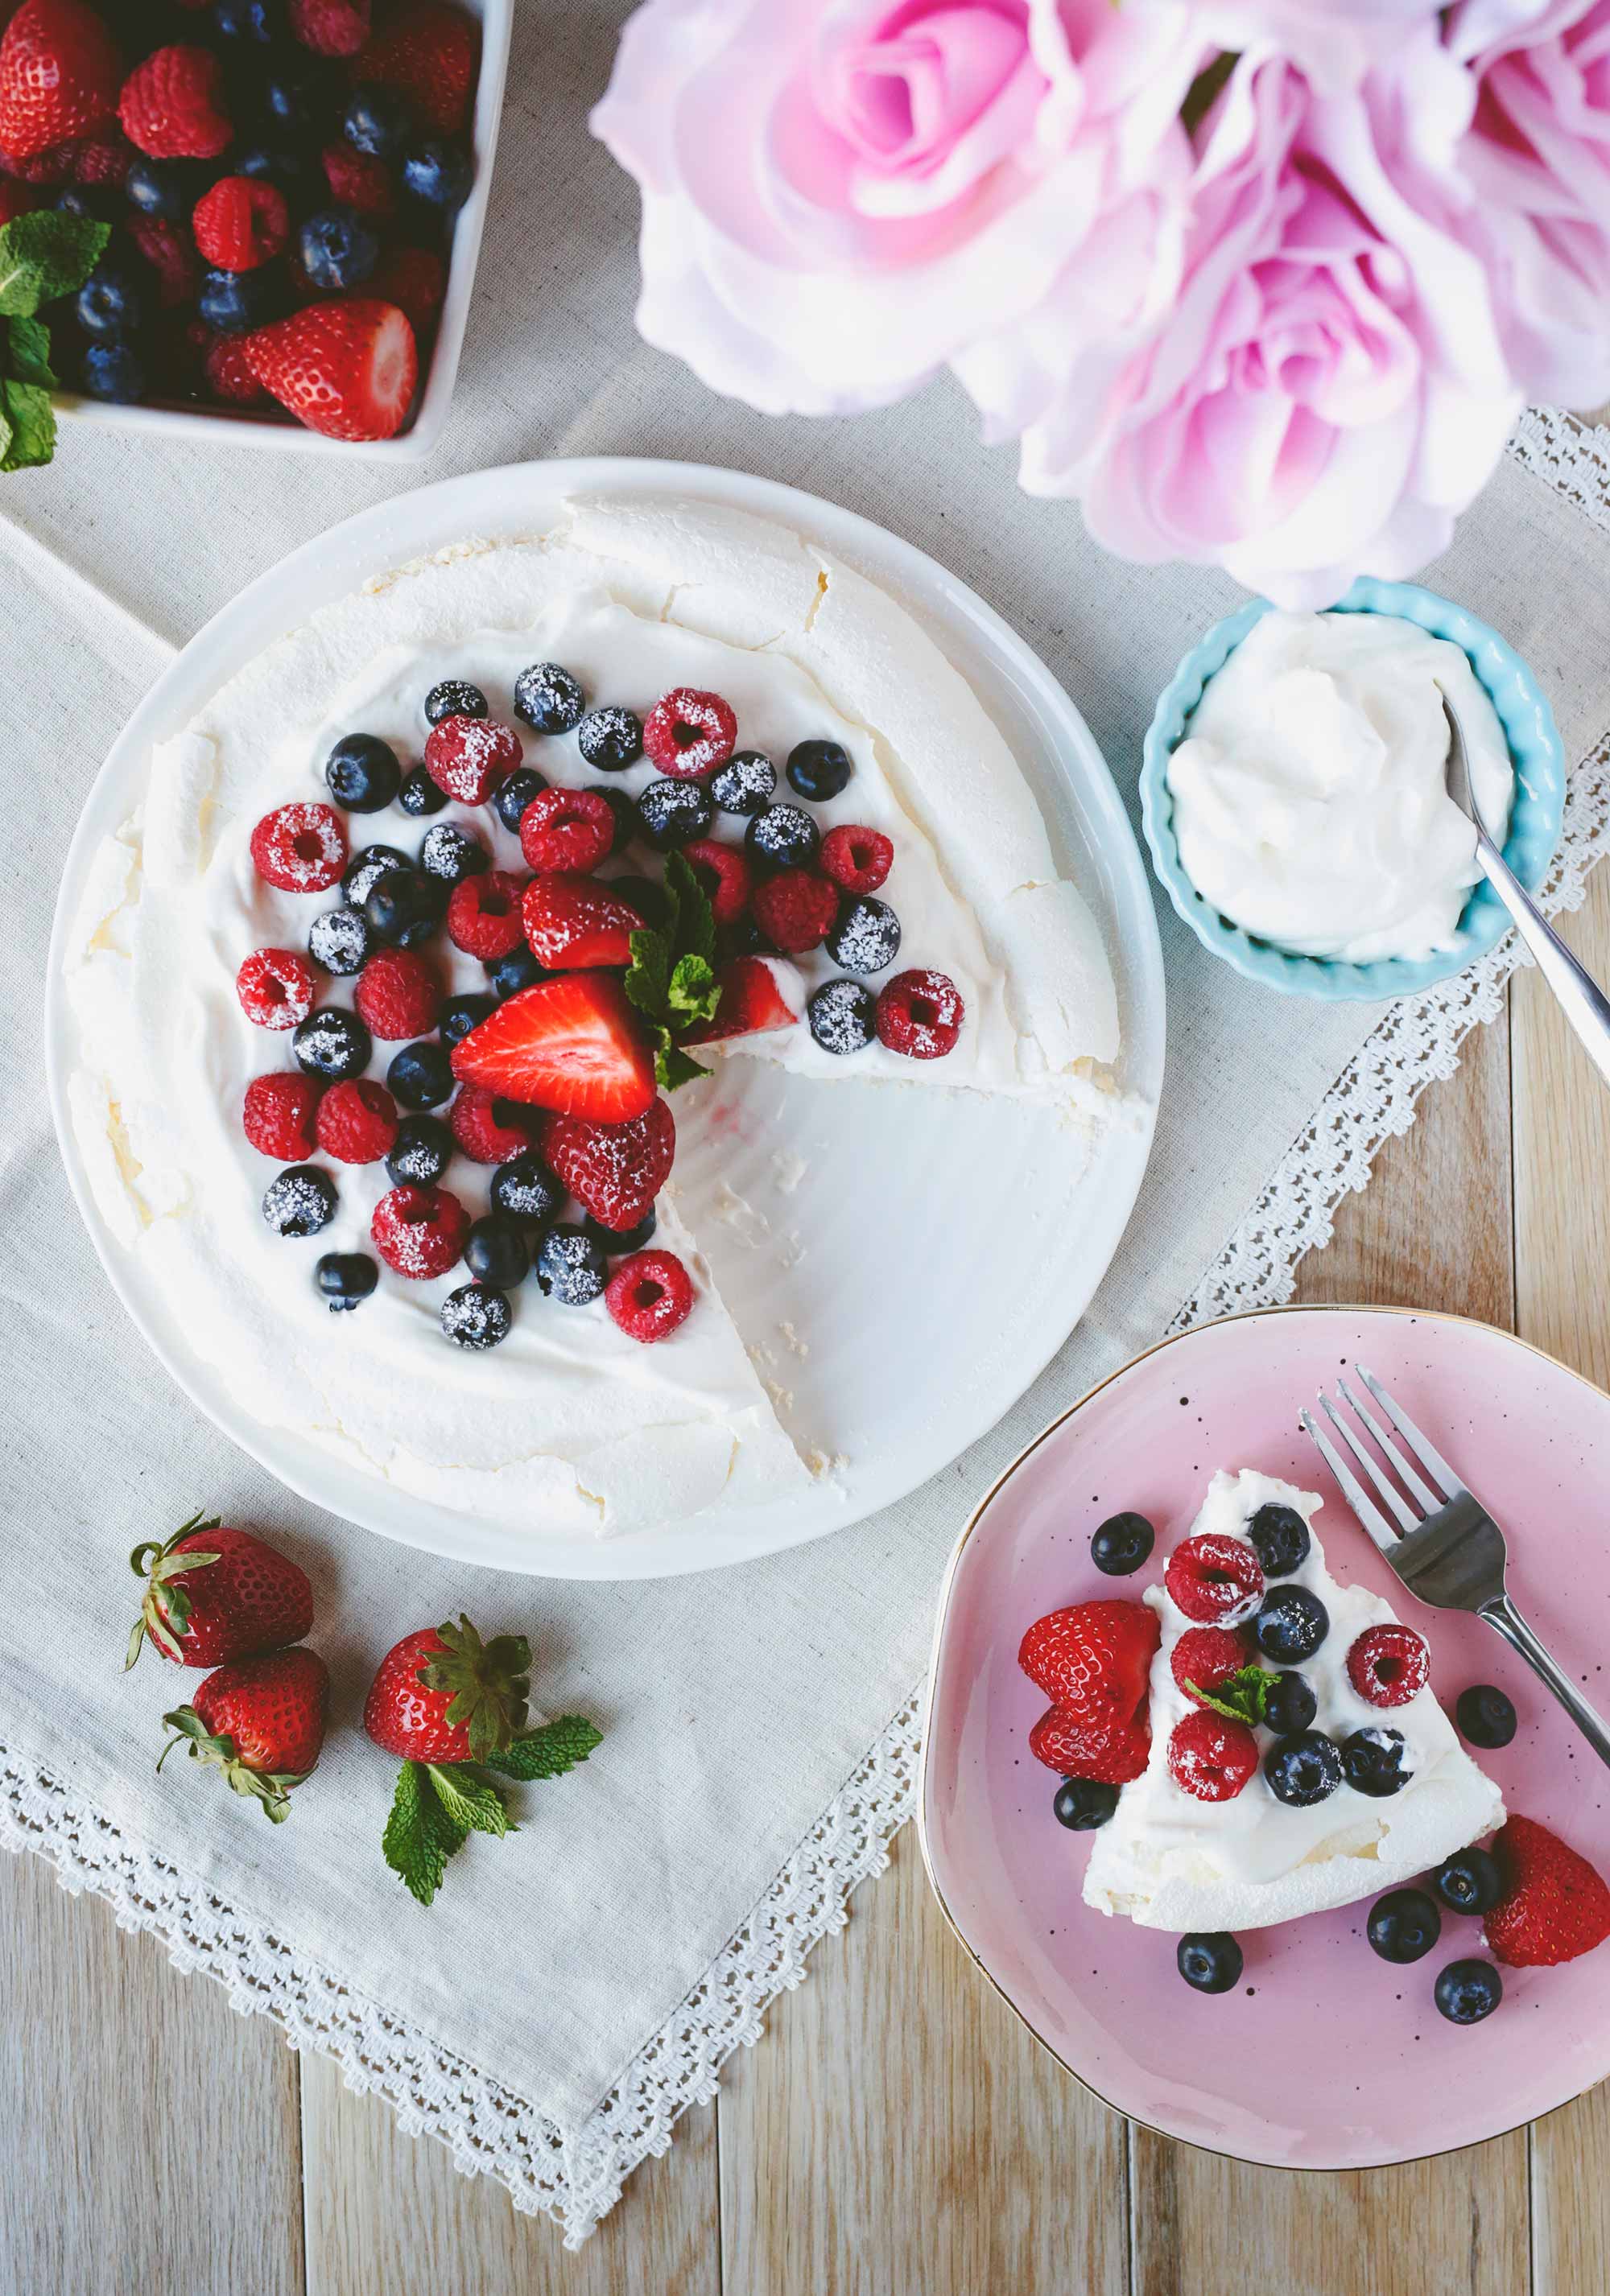 Easy Pavlova with Berries and Whipped Cream